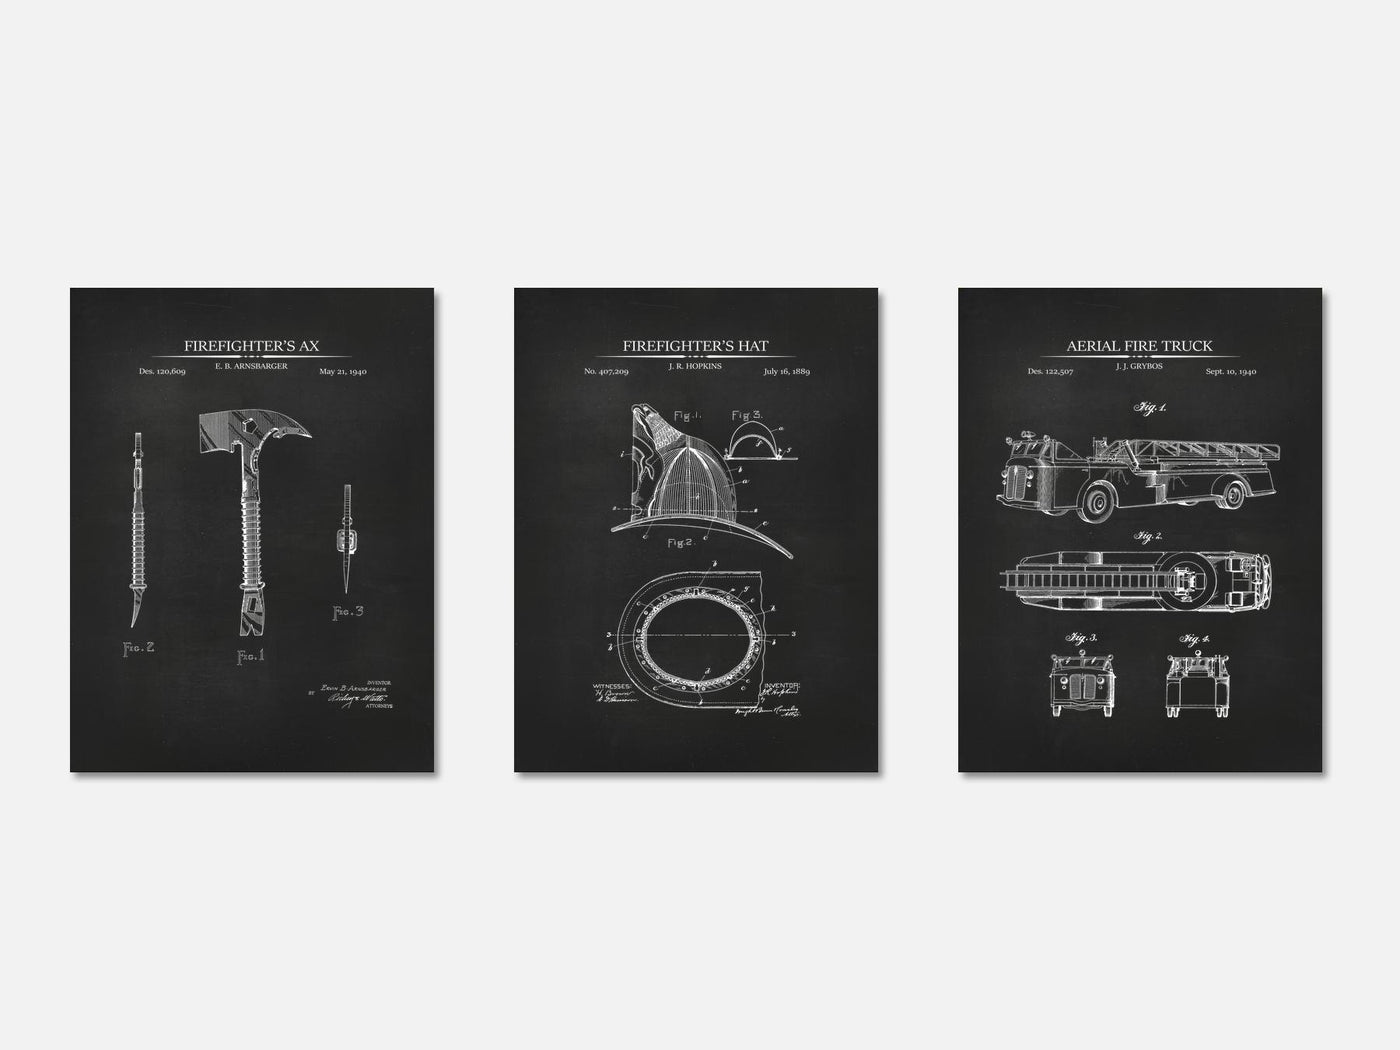 Firefighter Patent Print Set of 3 mockup - A_t10067-V1-PC_AP-SS_3-PS_11x14-C_cha variant